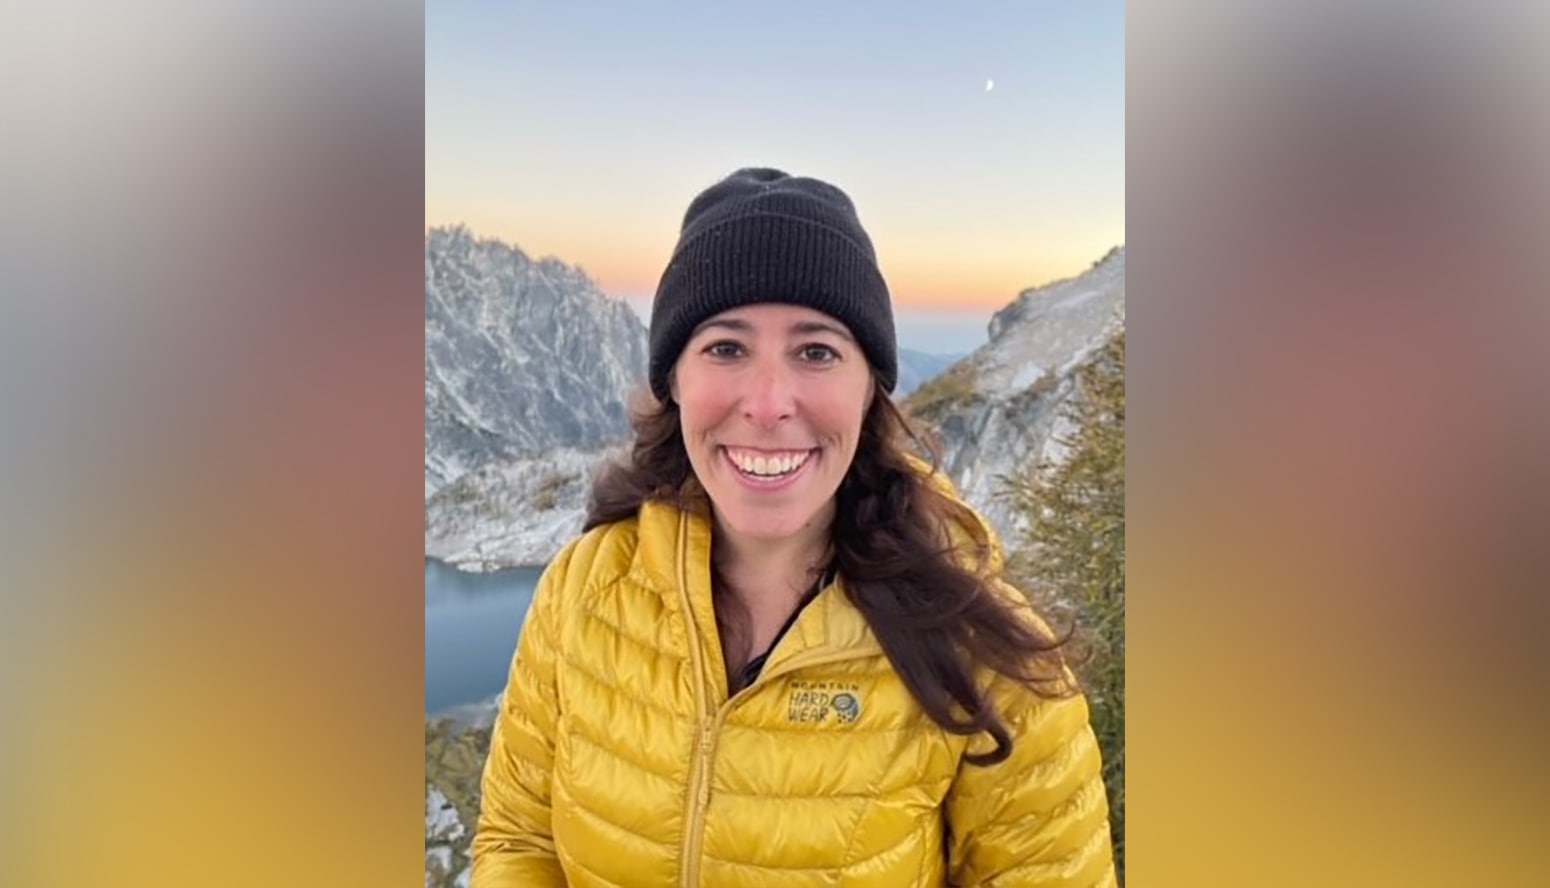 Rachel Heiss, 32, a resident of Seattle and Buffalo Grove native, died on September 9 during a hiking accident at Mt. Rainier National Park. | Provided Photo